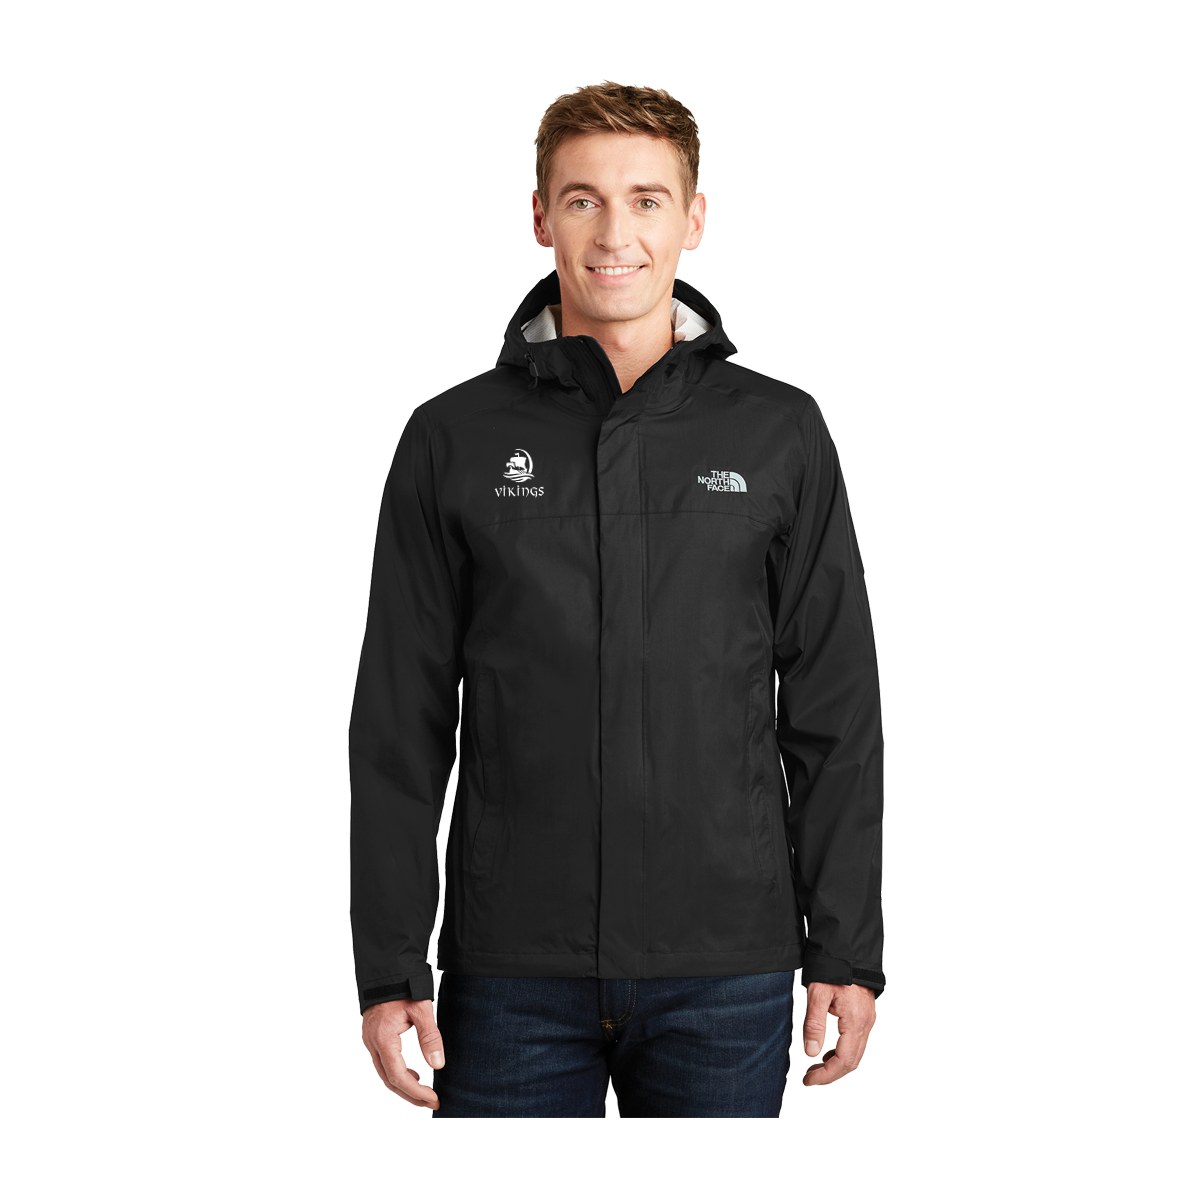 BLE Adult The North Face DryVent Rain Jacket *Embroidery